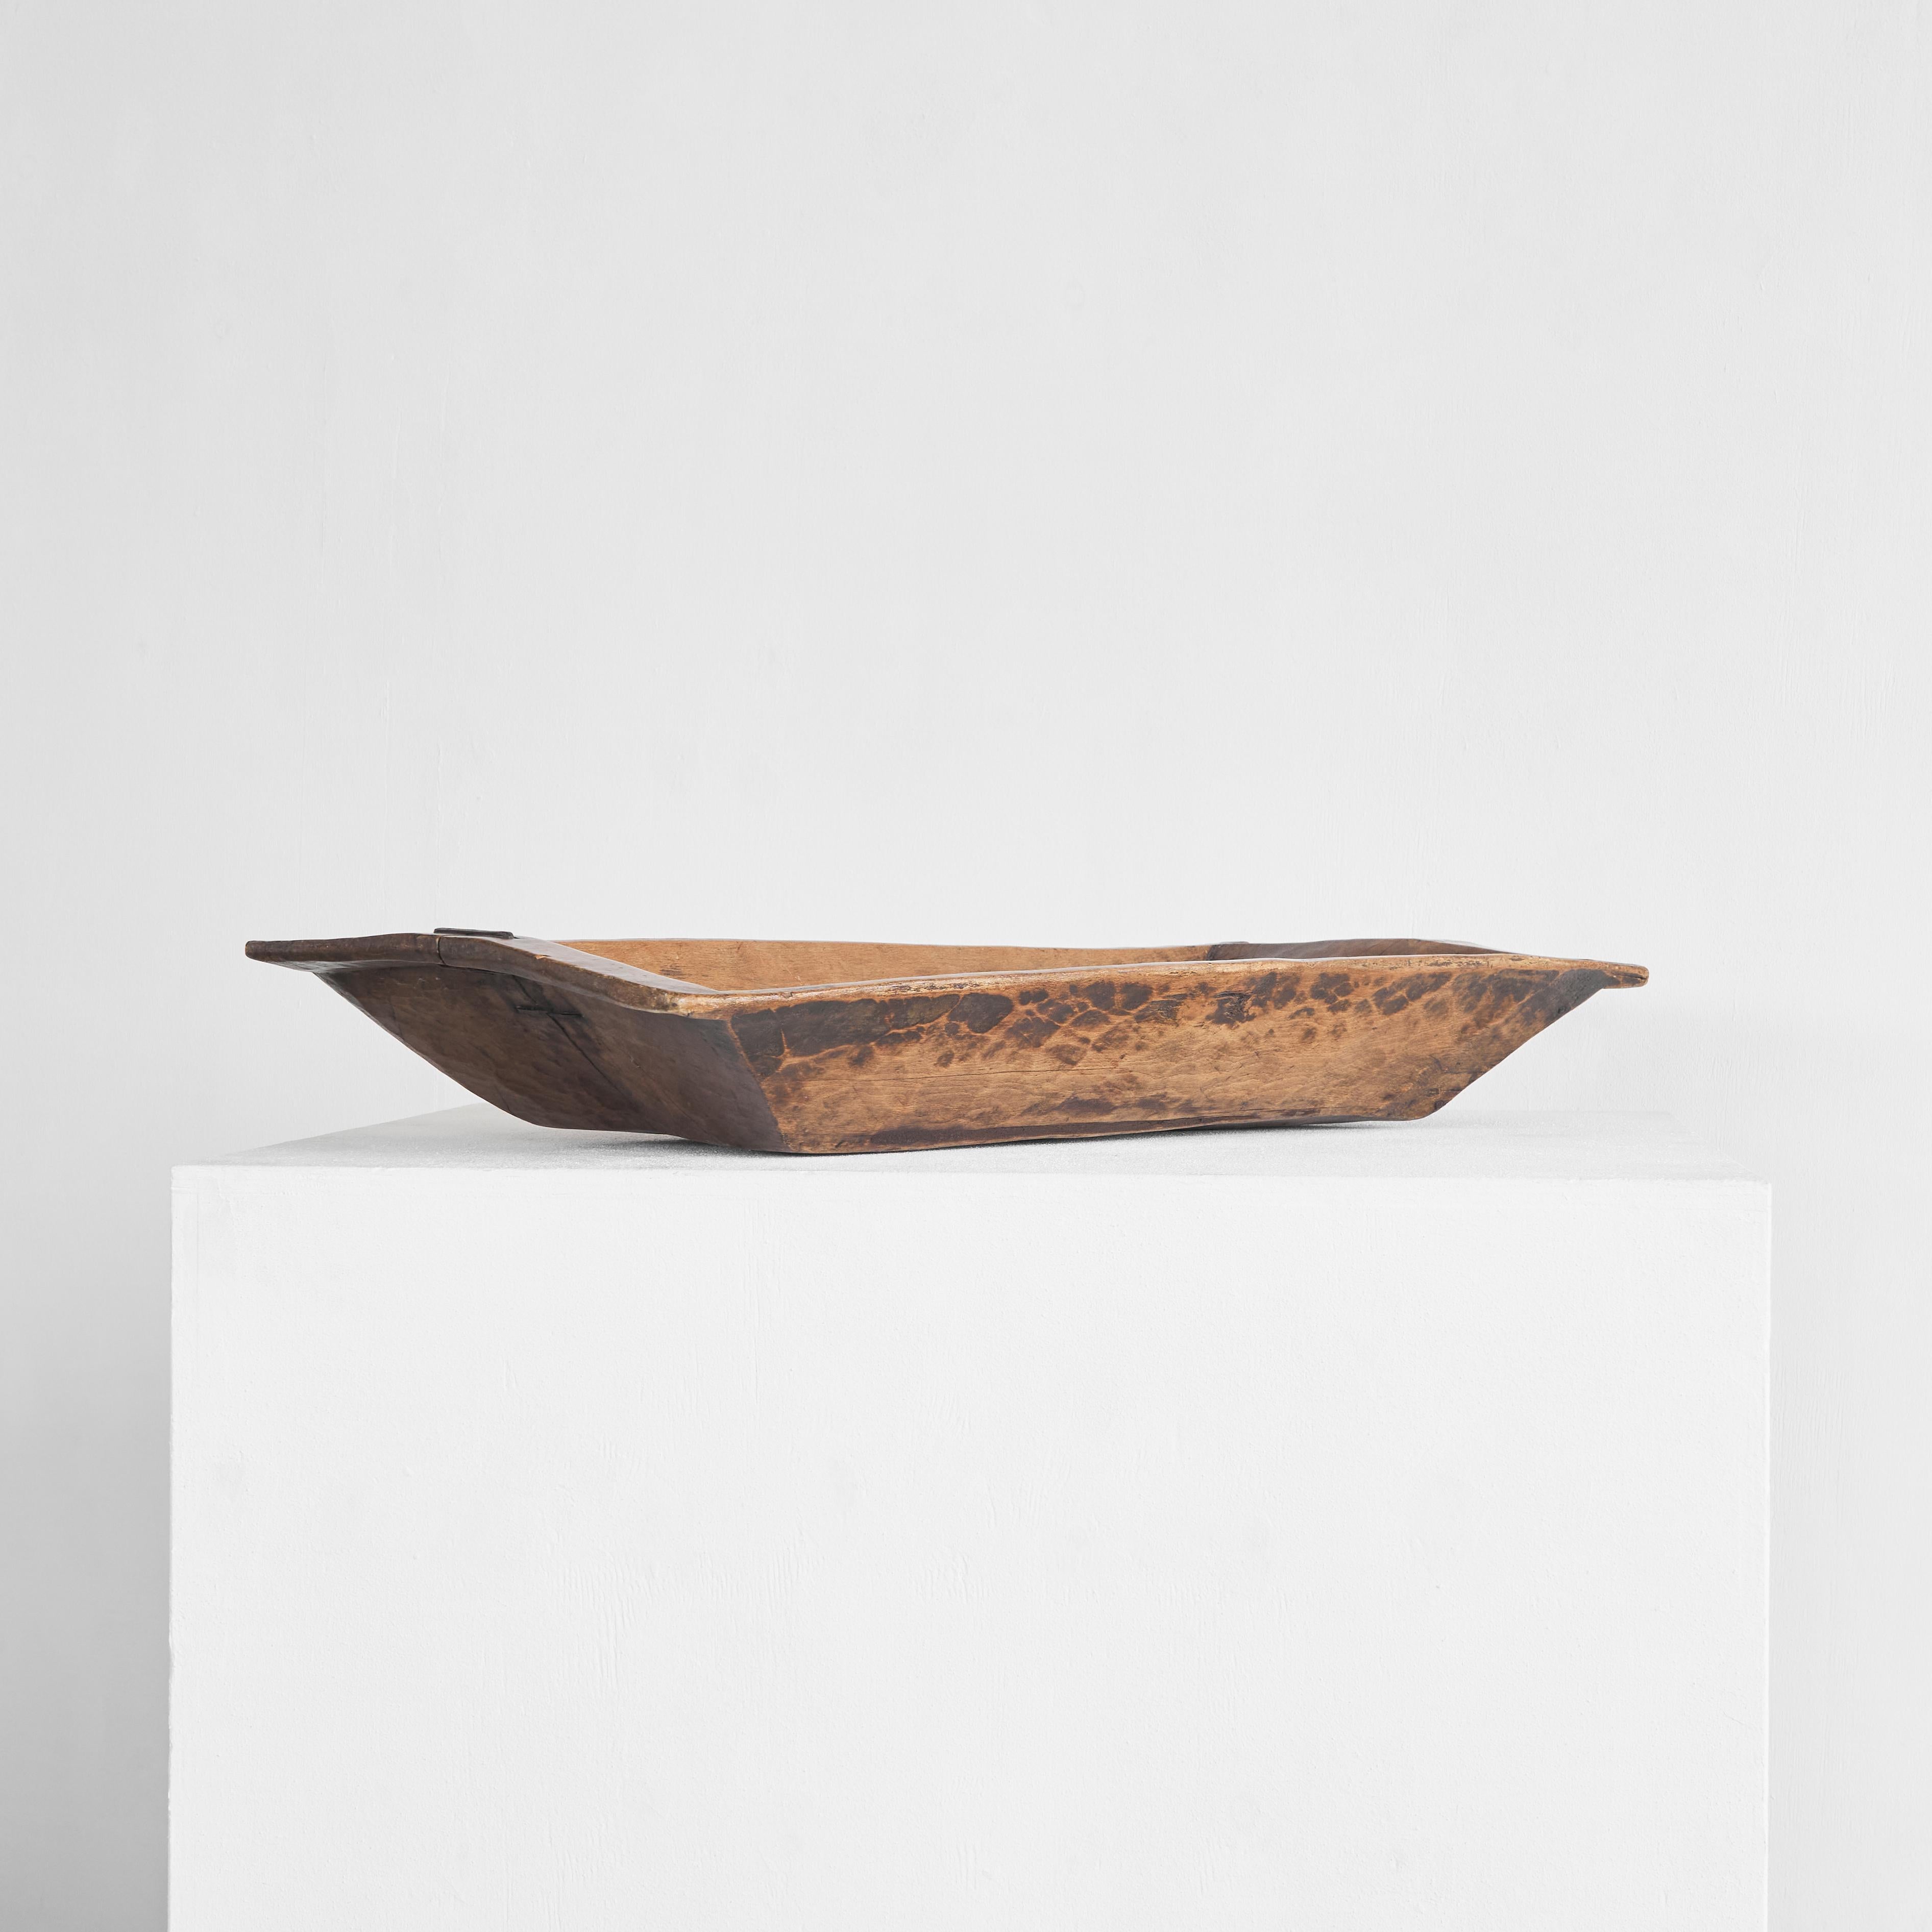 European Monumental Antique Hand Carved Wooden Trough or Bowl Wabi Sabi, 19th Century For Sale